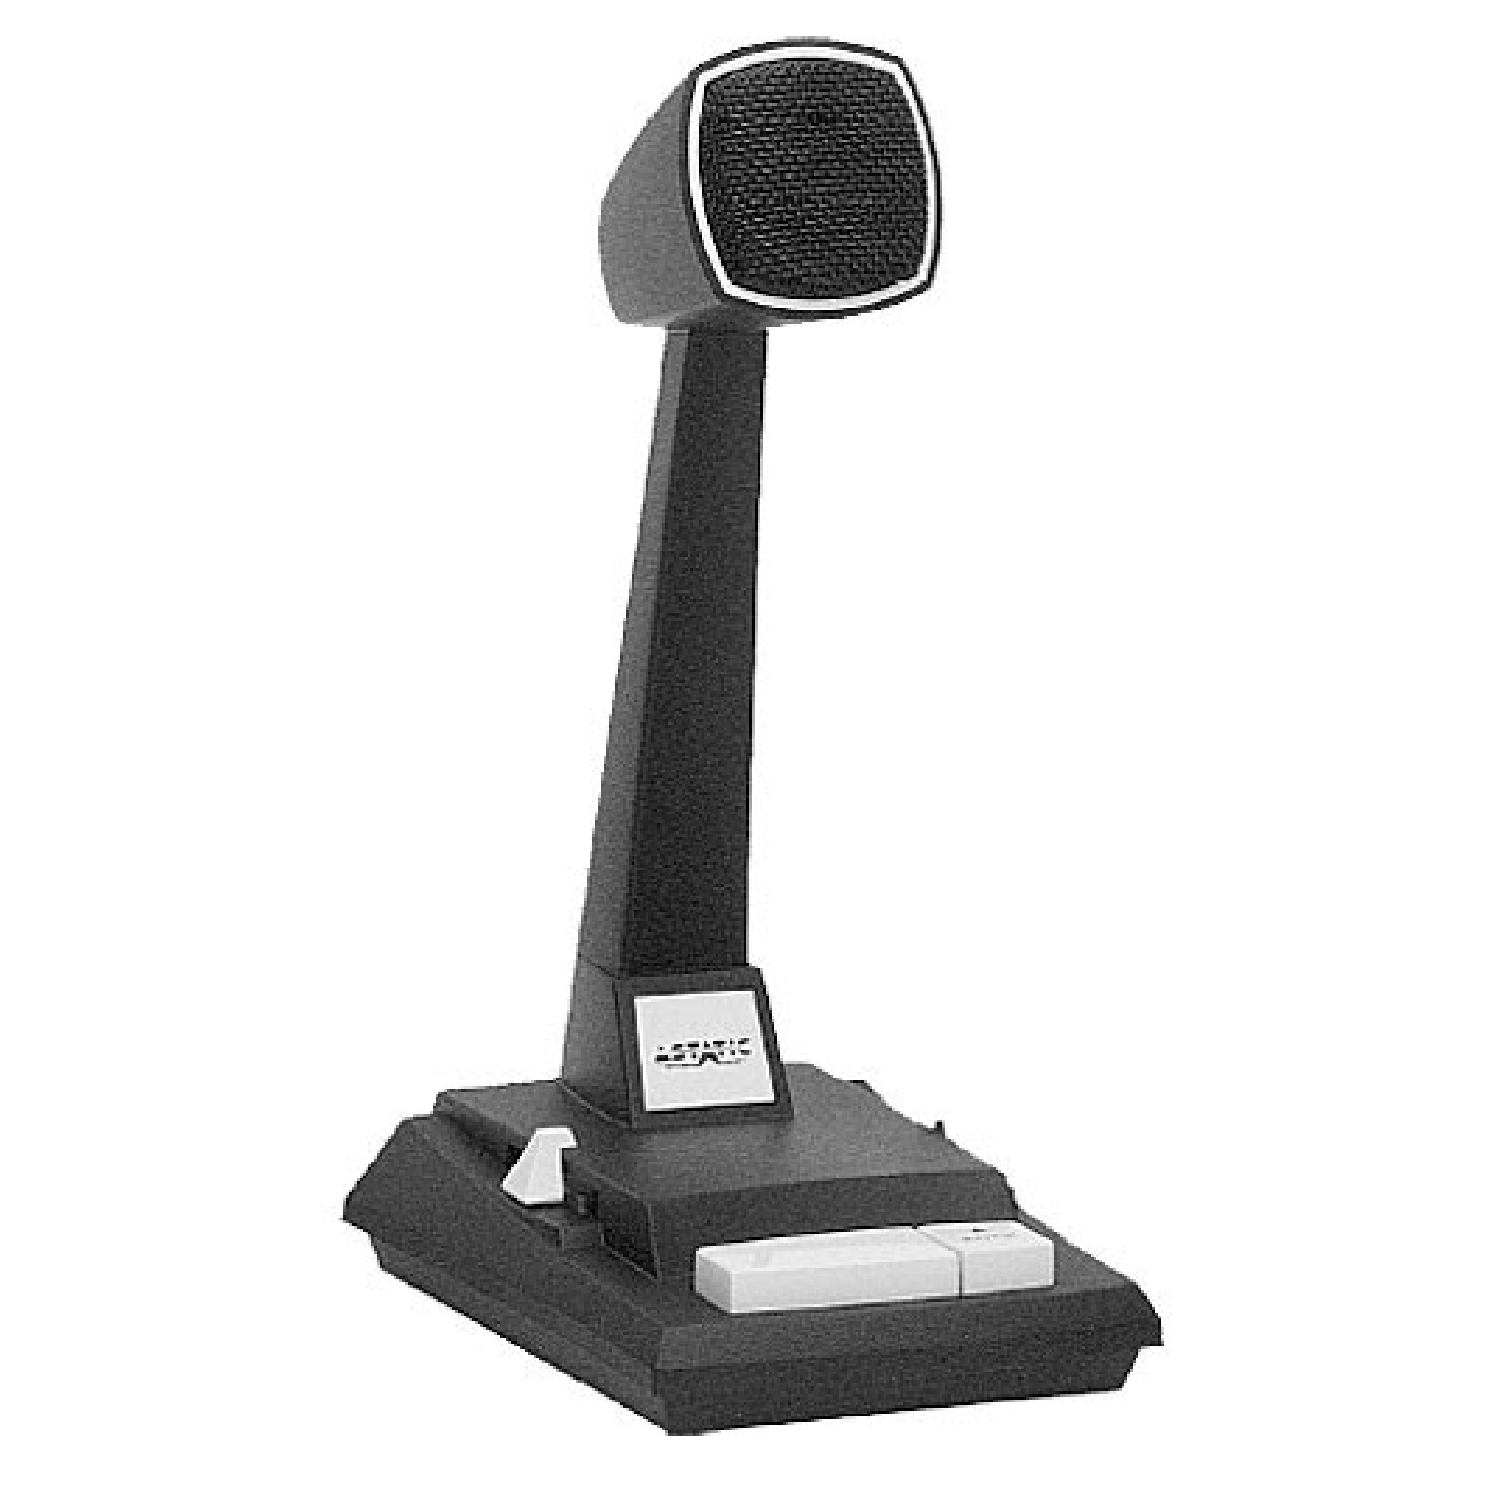 Desktop Omnidirectional Dynamic Paging Mic with Locking Push to Talk Switch   878HL 2 cad audio